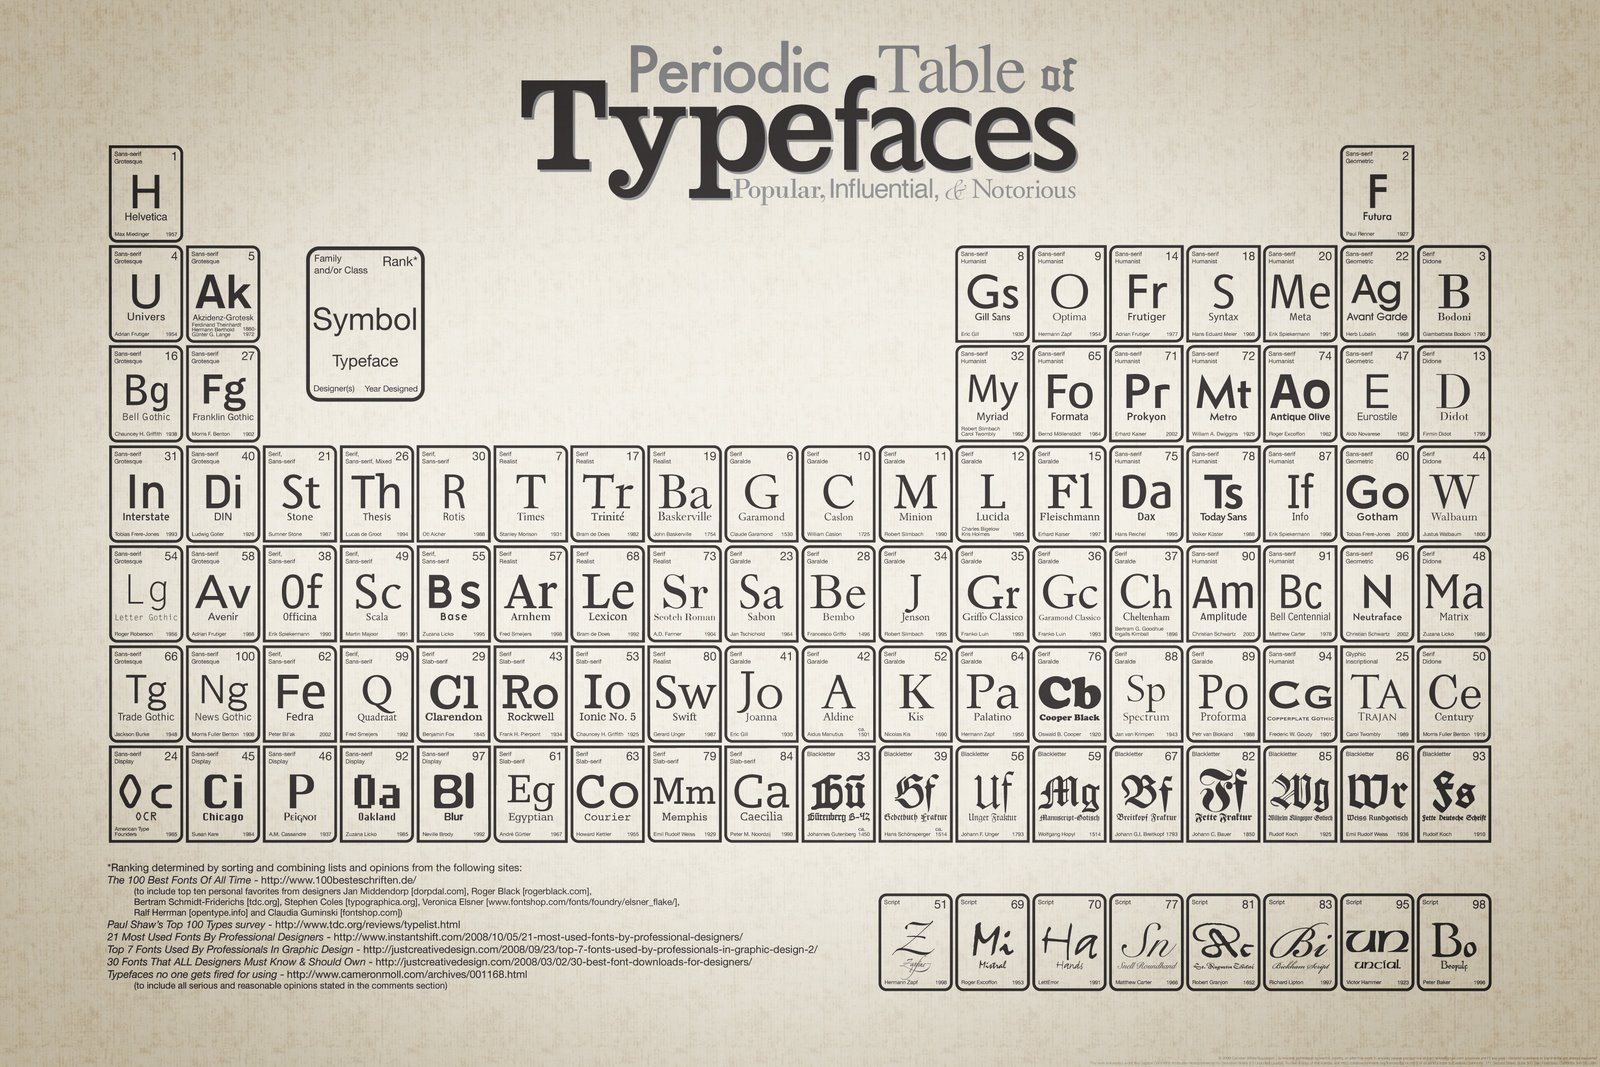 [Periodic_Table_of_Typefaces_large.jpg]